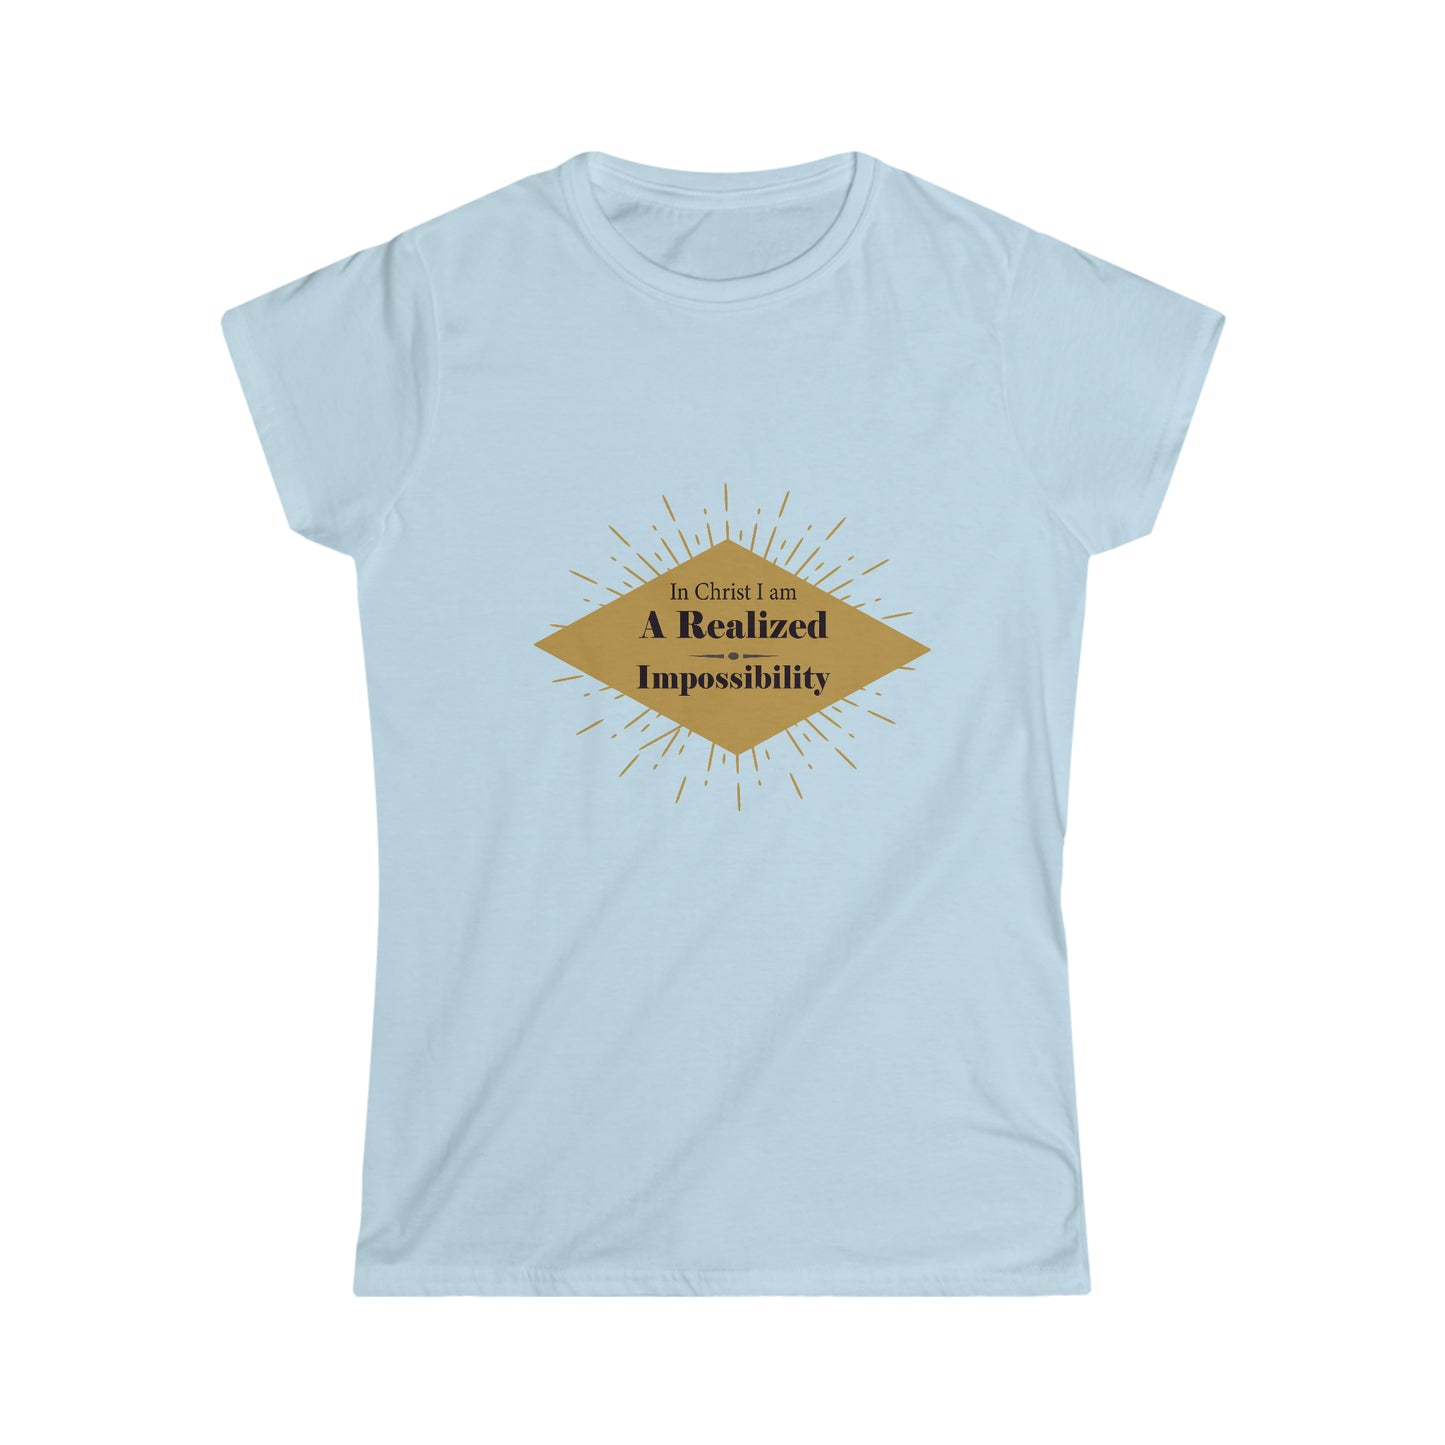 In Christ I Am A Realized Impossibility Women’s T-shirt